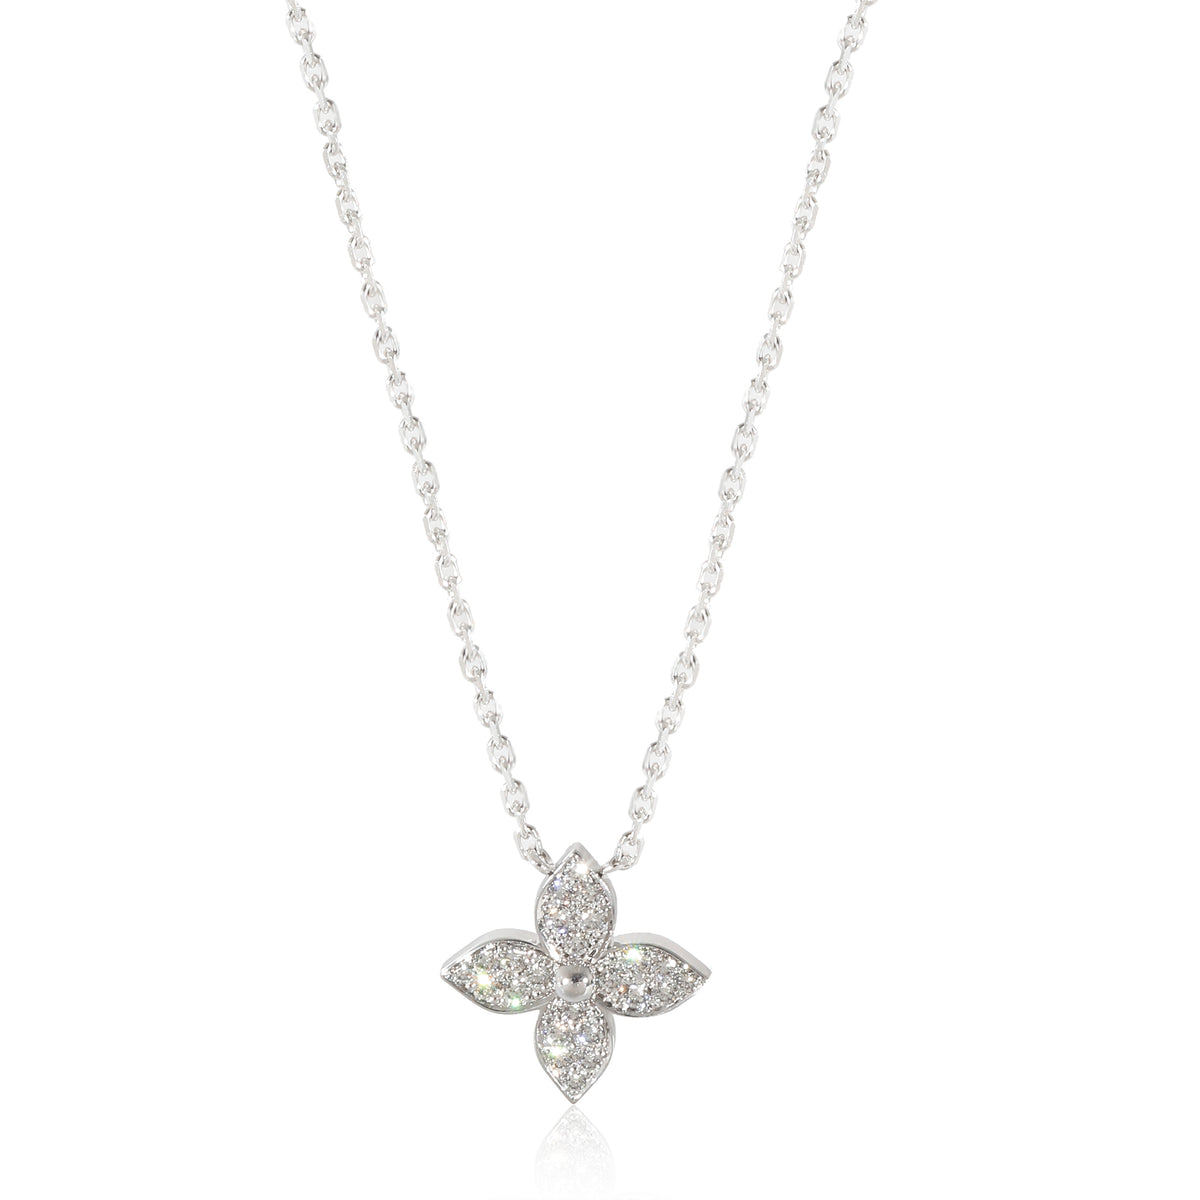 Idylle Blossom pendant, white gold and diamond - Jewelry - Categories